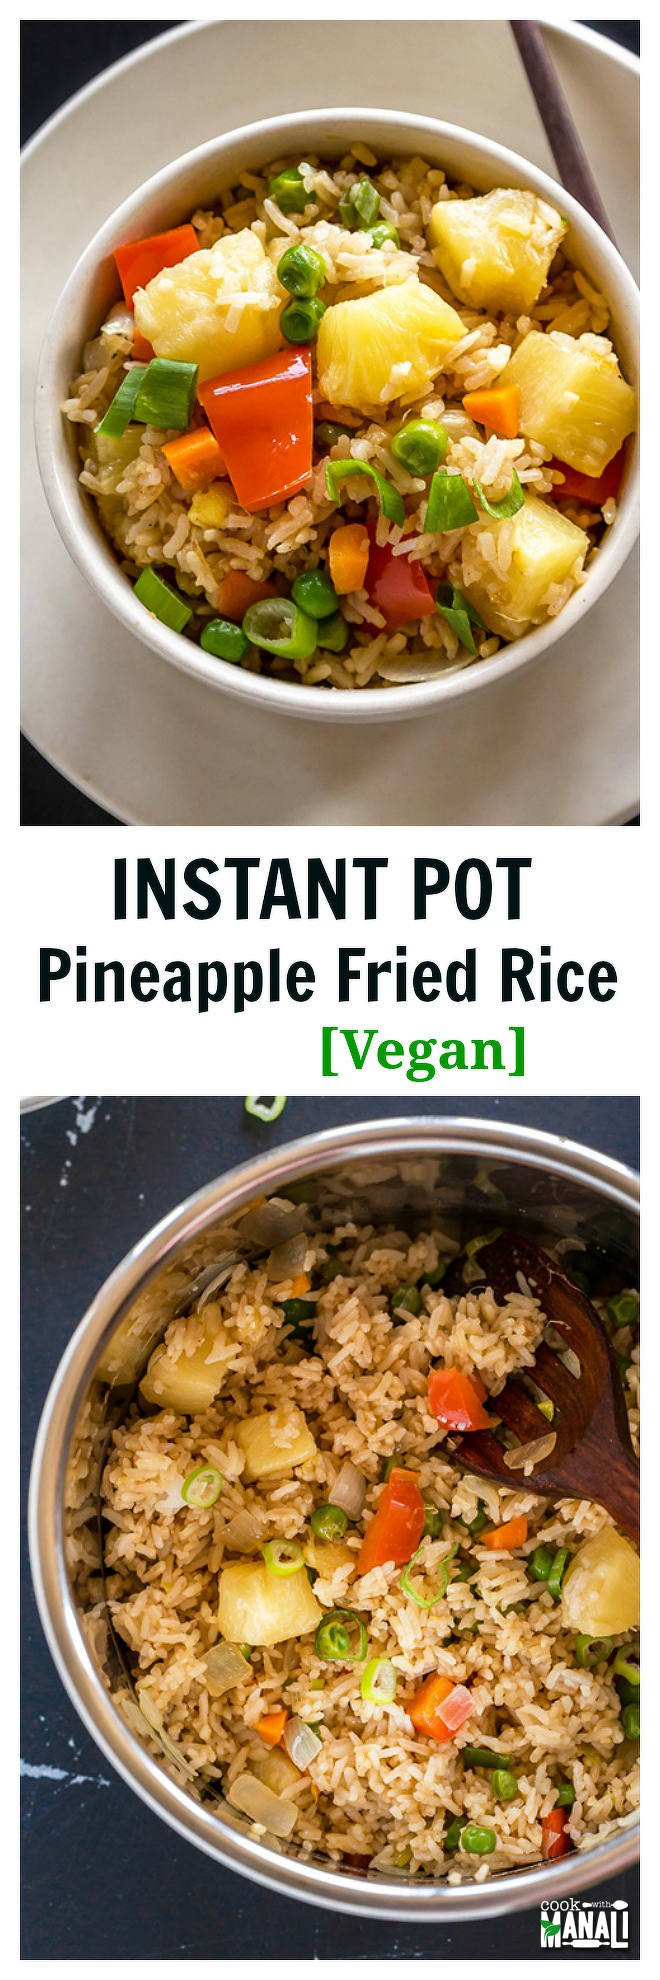 Instant Pot Recipes Vegetarian
 Instant Pot Vegan Pineapple Fried Rice Video Cook With